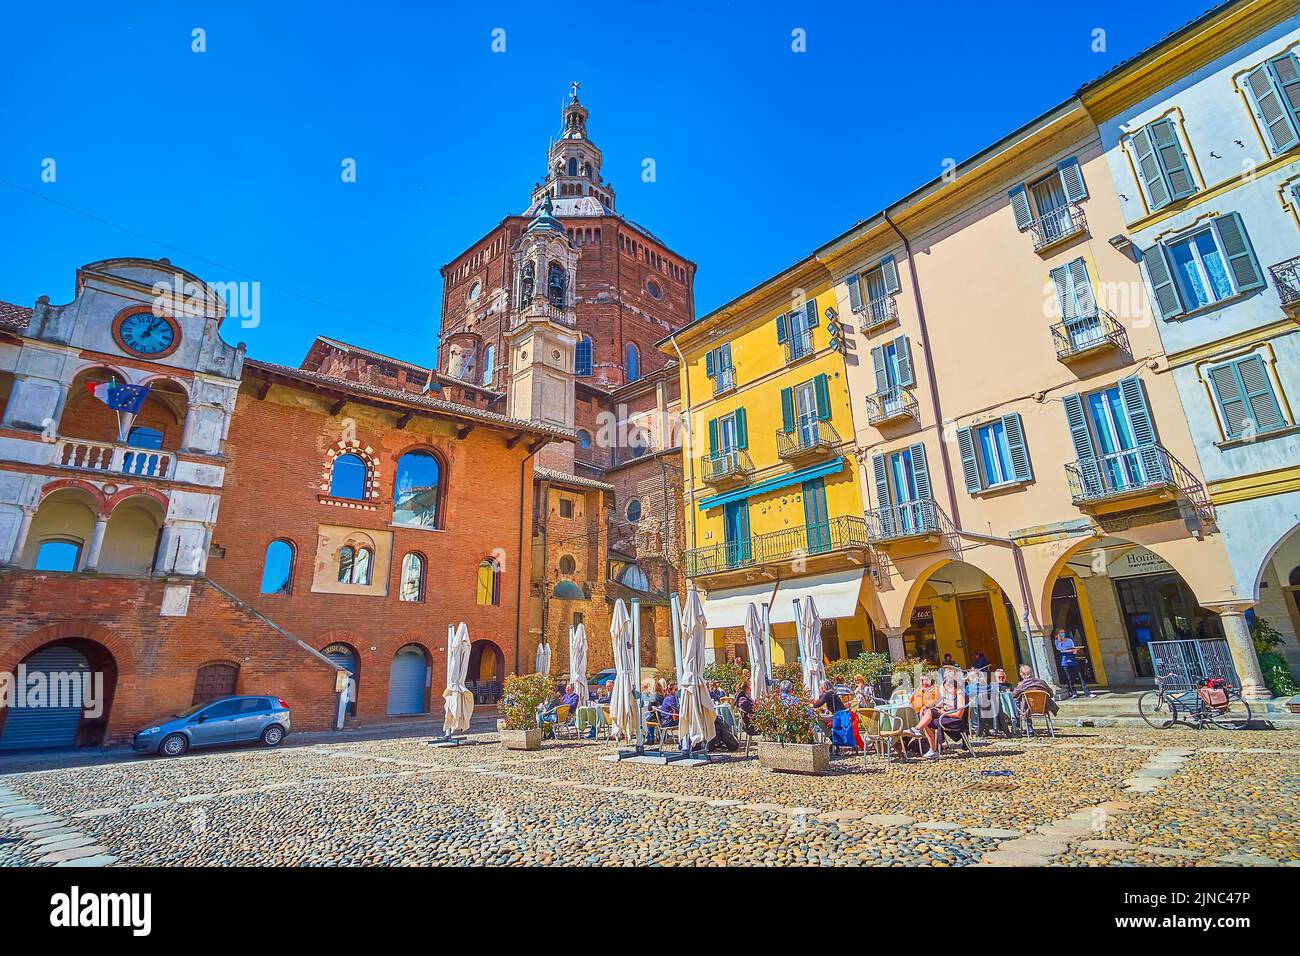 PAVIA, ITALY - APRIL 9, 2022: The heart of Pavia old town, Piazza della Vittorio  with medieval palaces and villas, on April 9 in Pavia, Italy Stock Photo